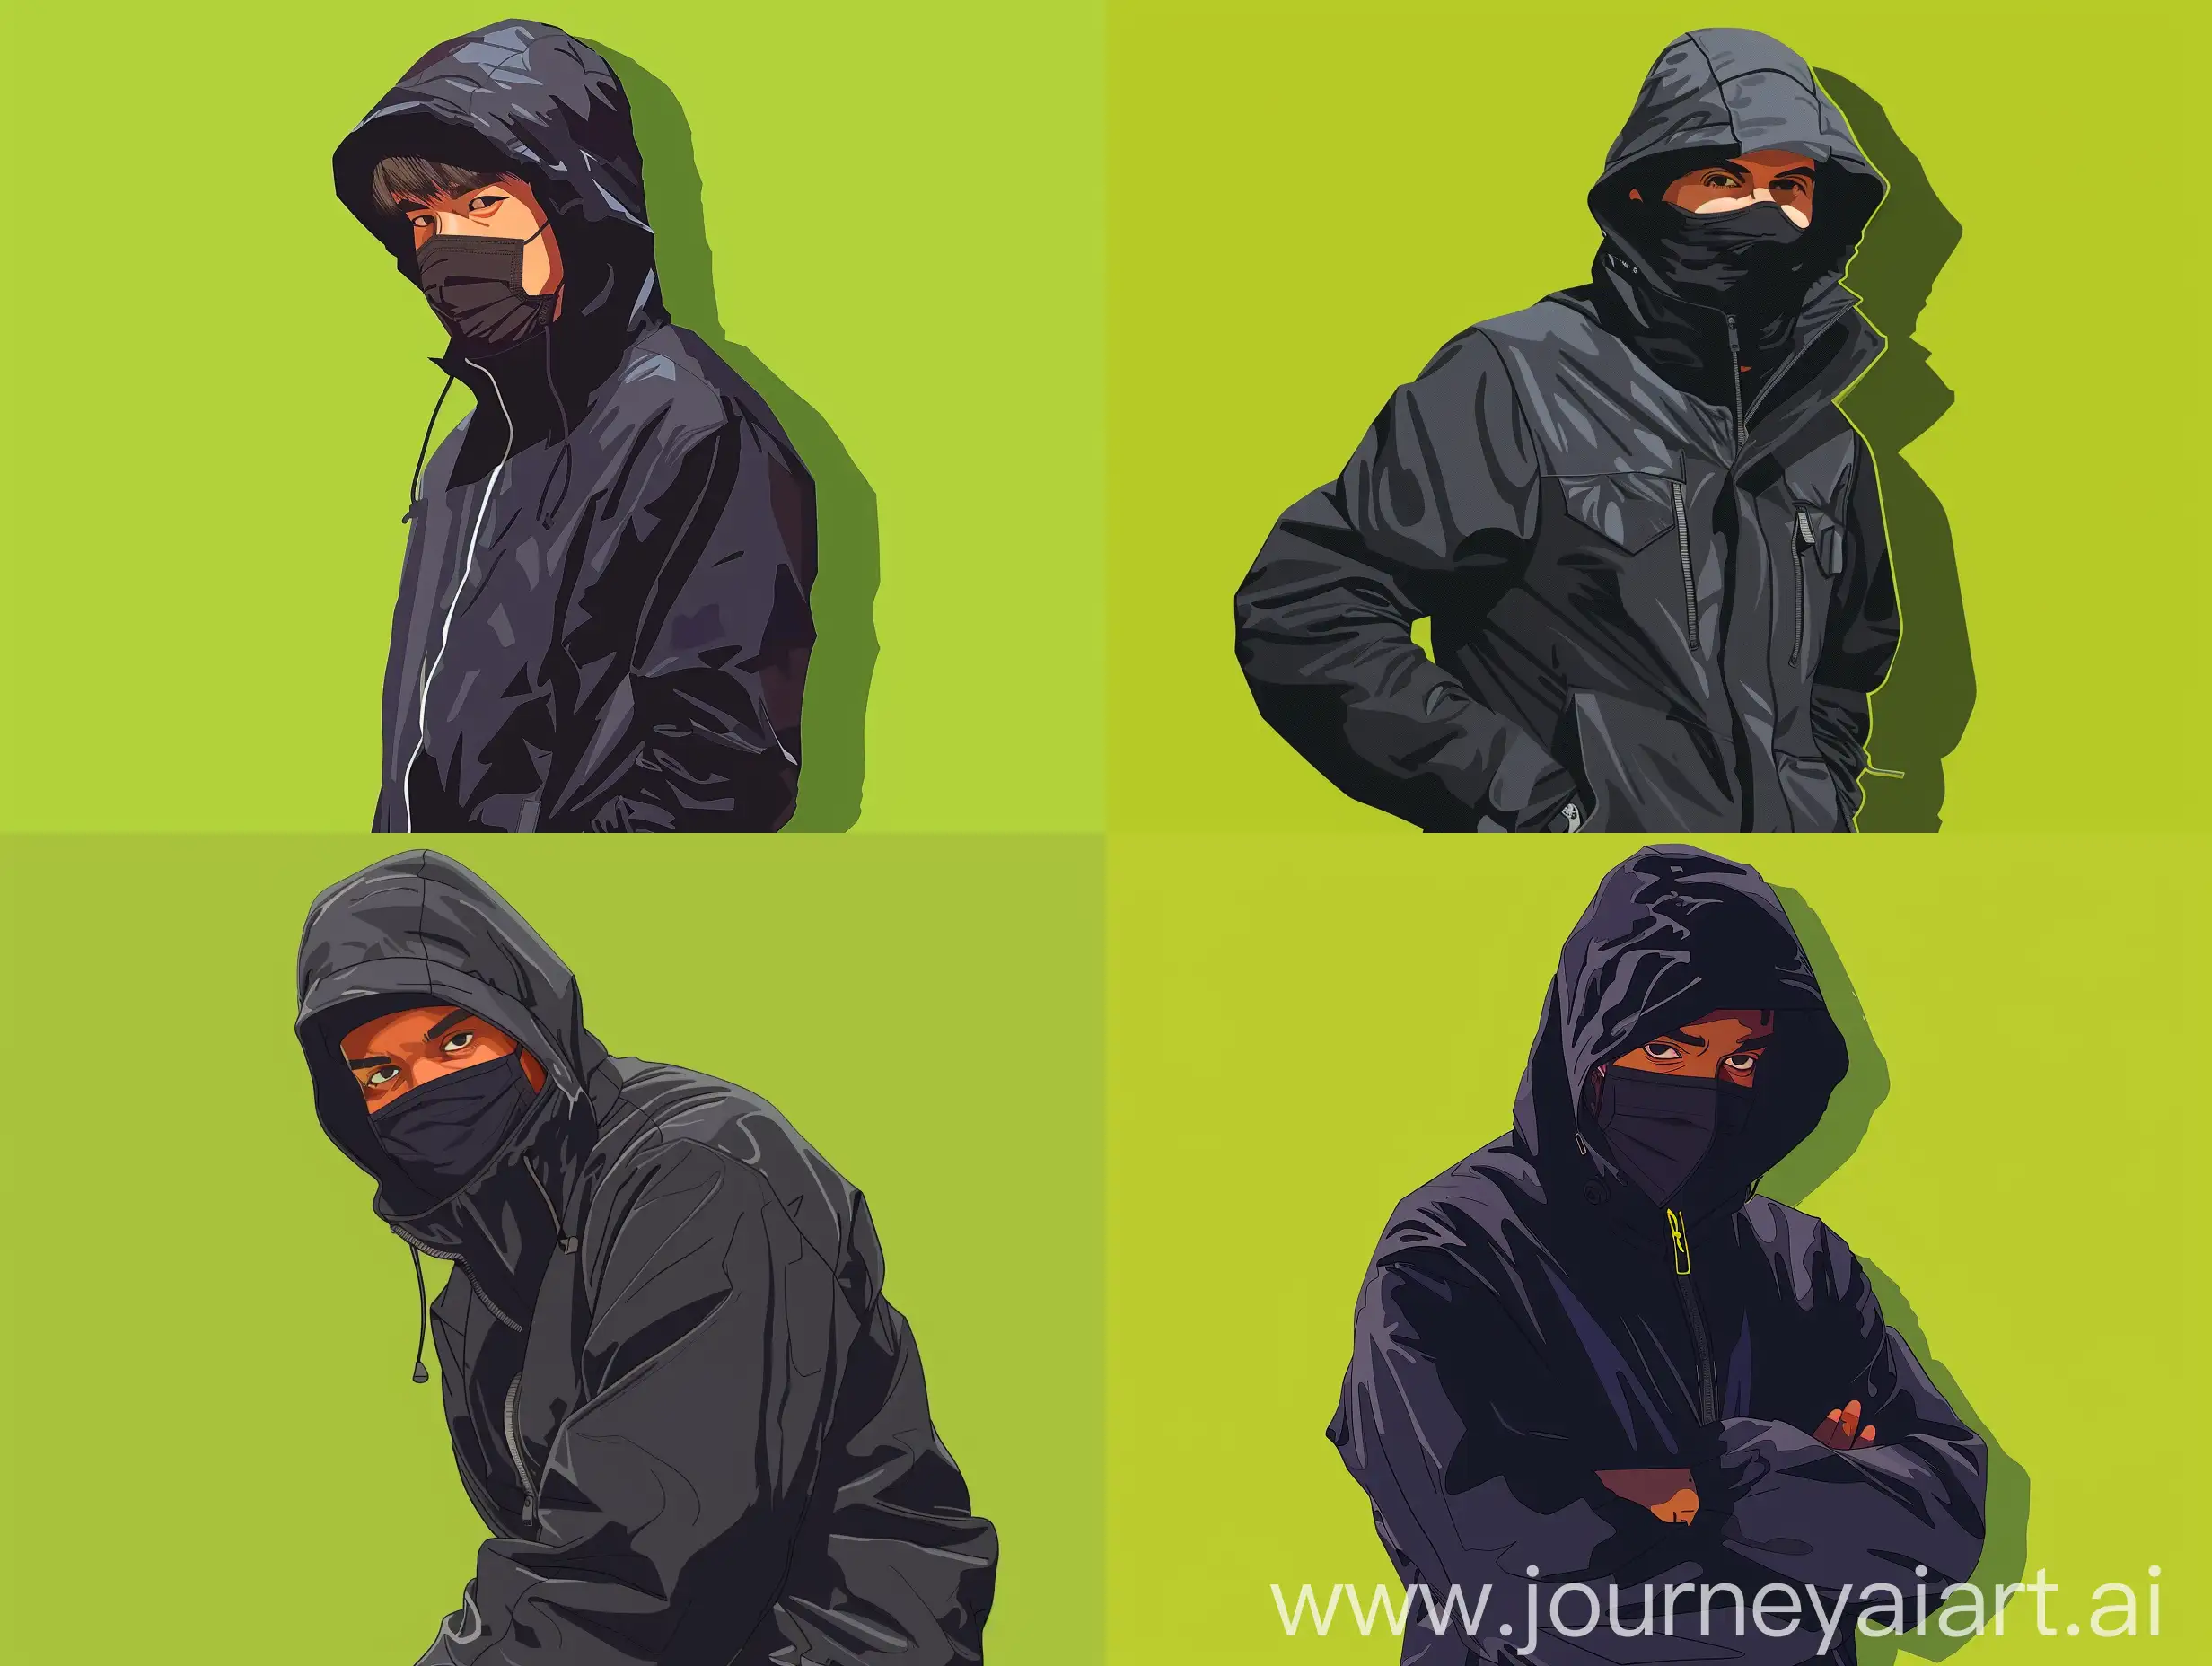 A man in his early 30s wearing a black jacket with a hood up and a mask covering his nose and mouth, on a bright green background in a full-length T pose, all in cartoon style